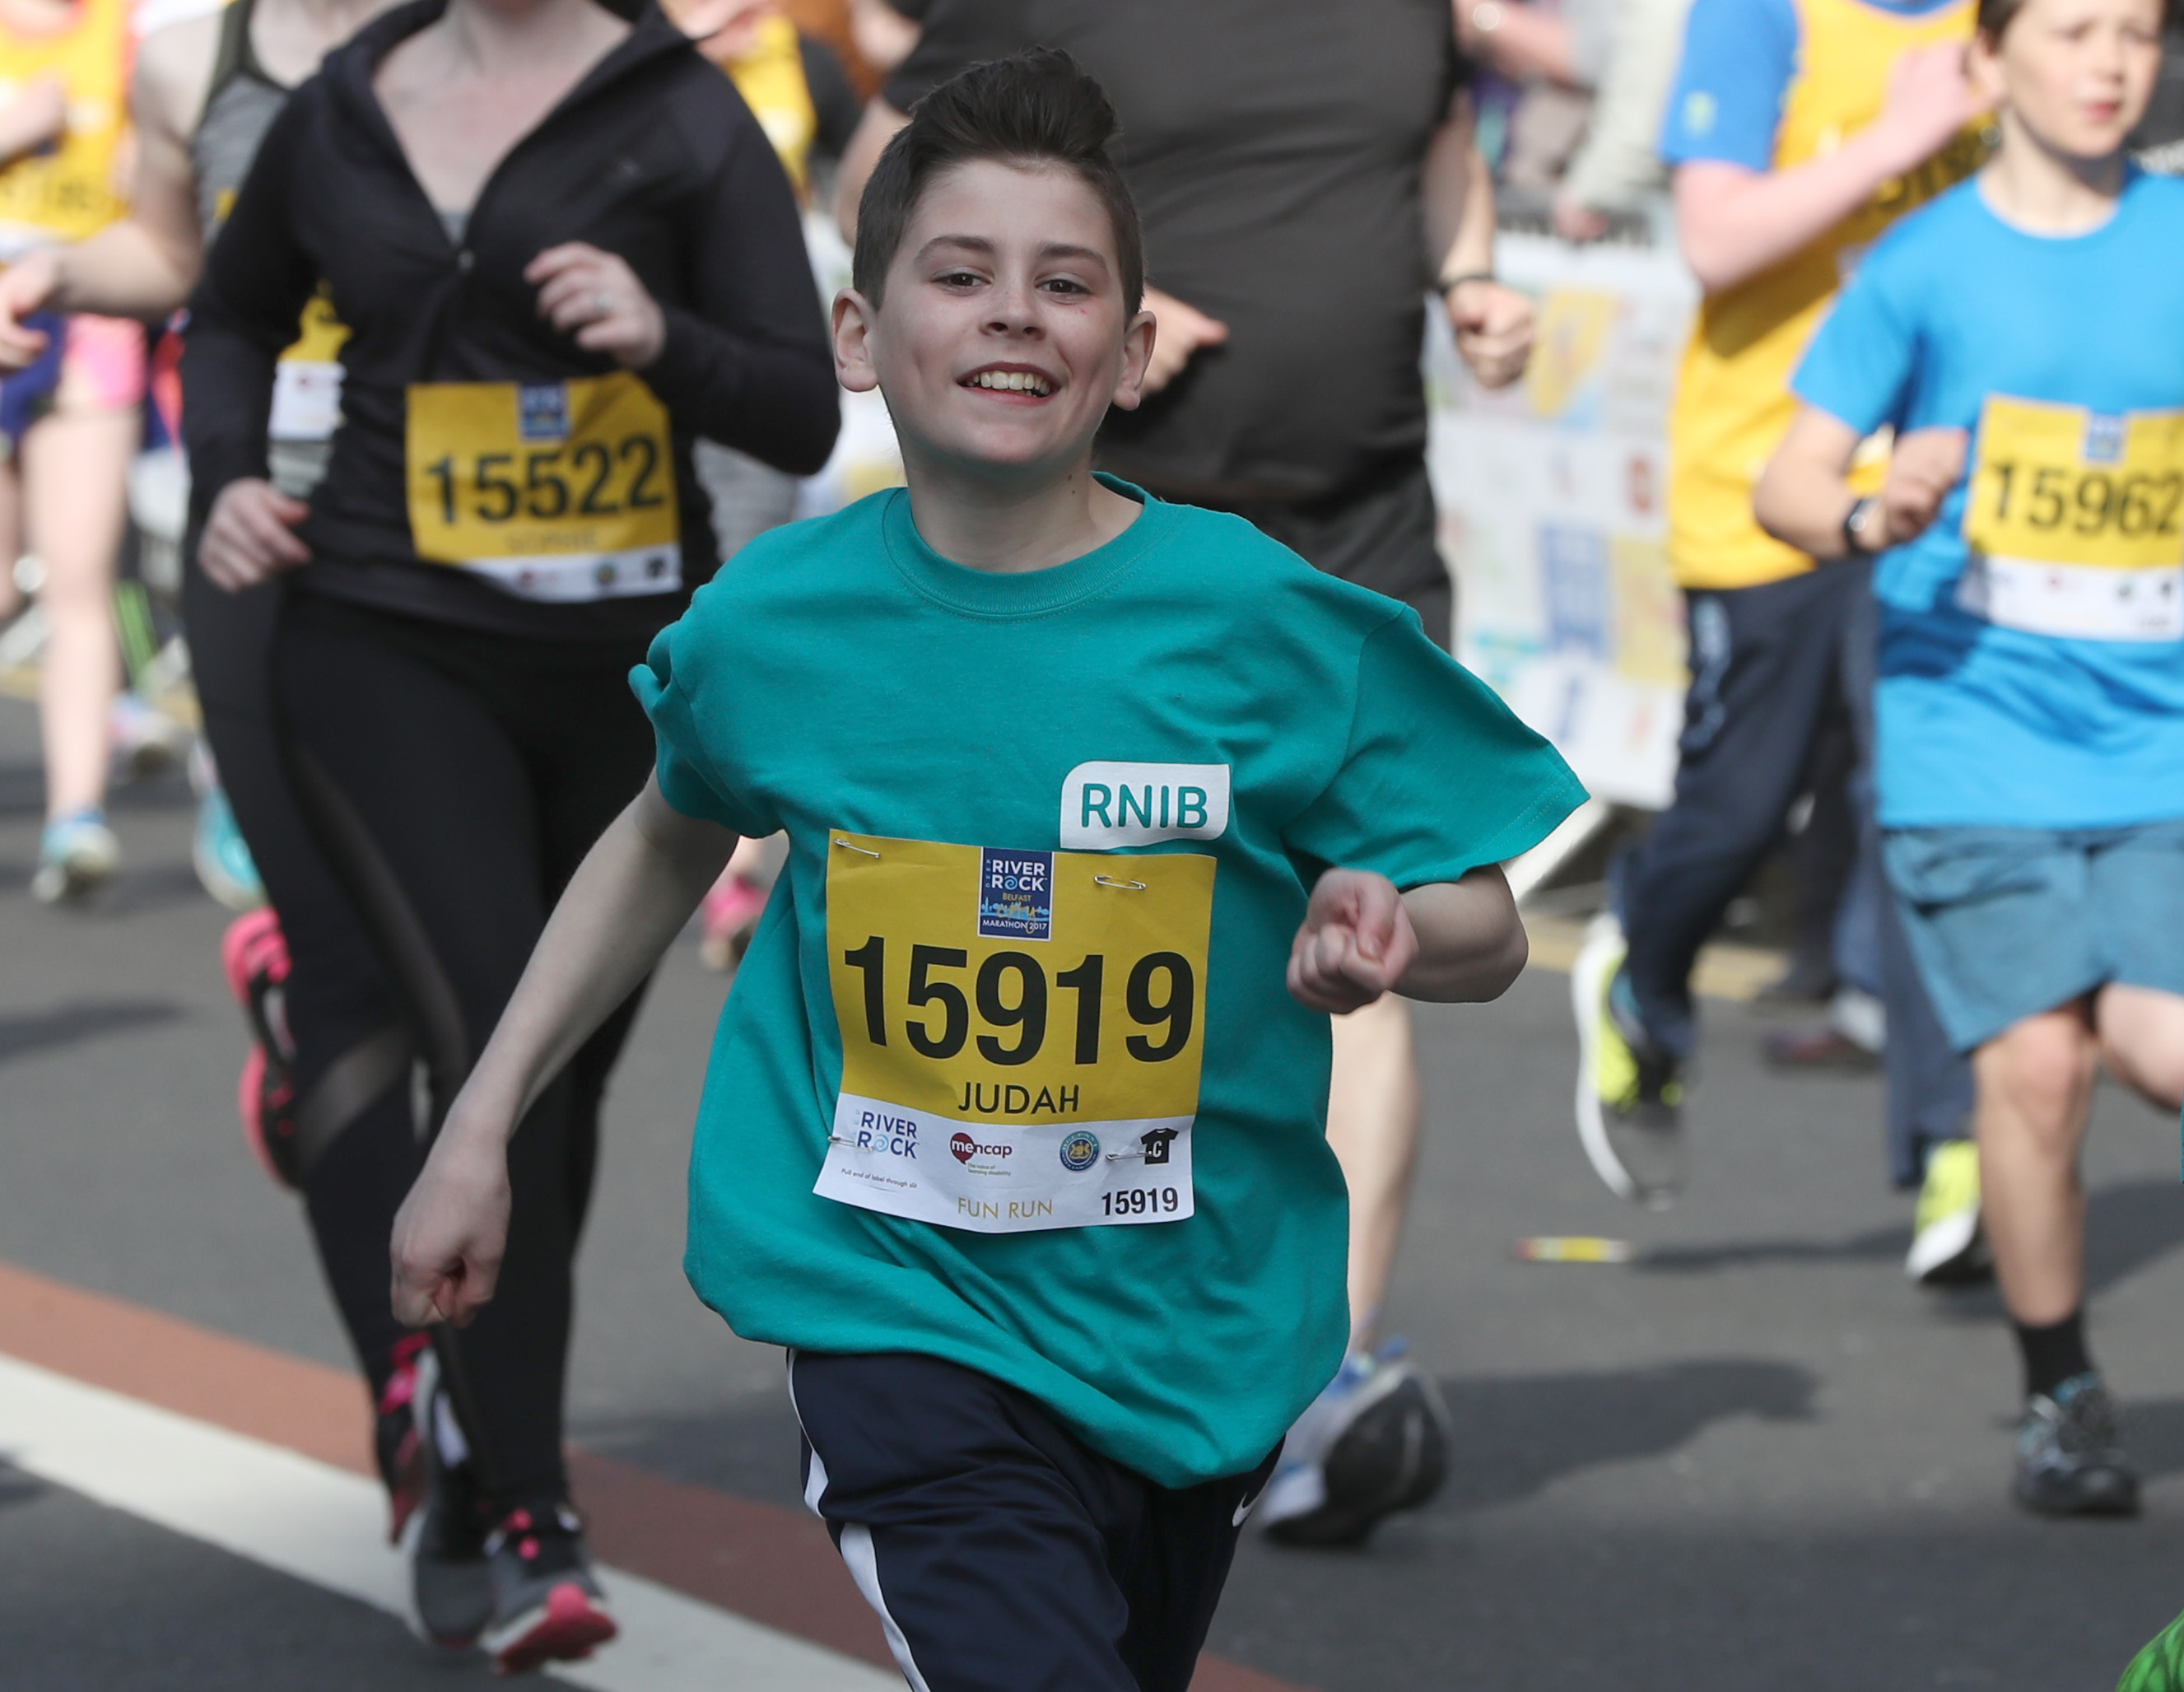 WIN incredible prizes for your school with the Moy Park Belfast City Marathon SUPERHERO CHALLENGE 